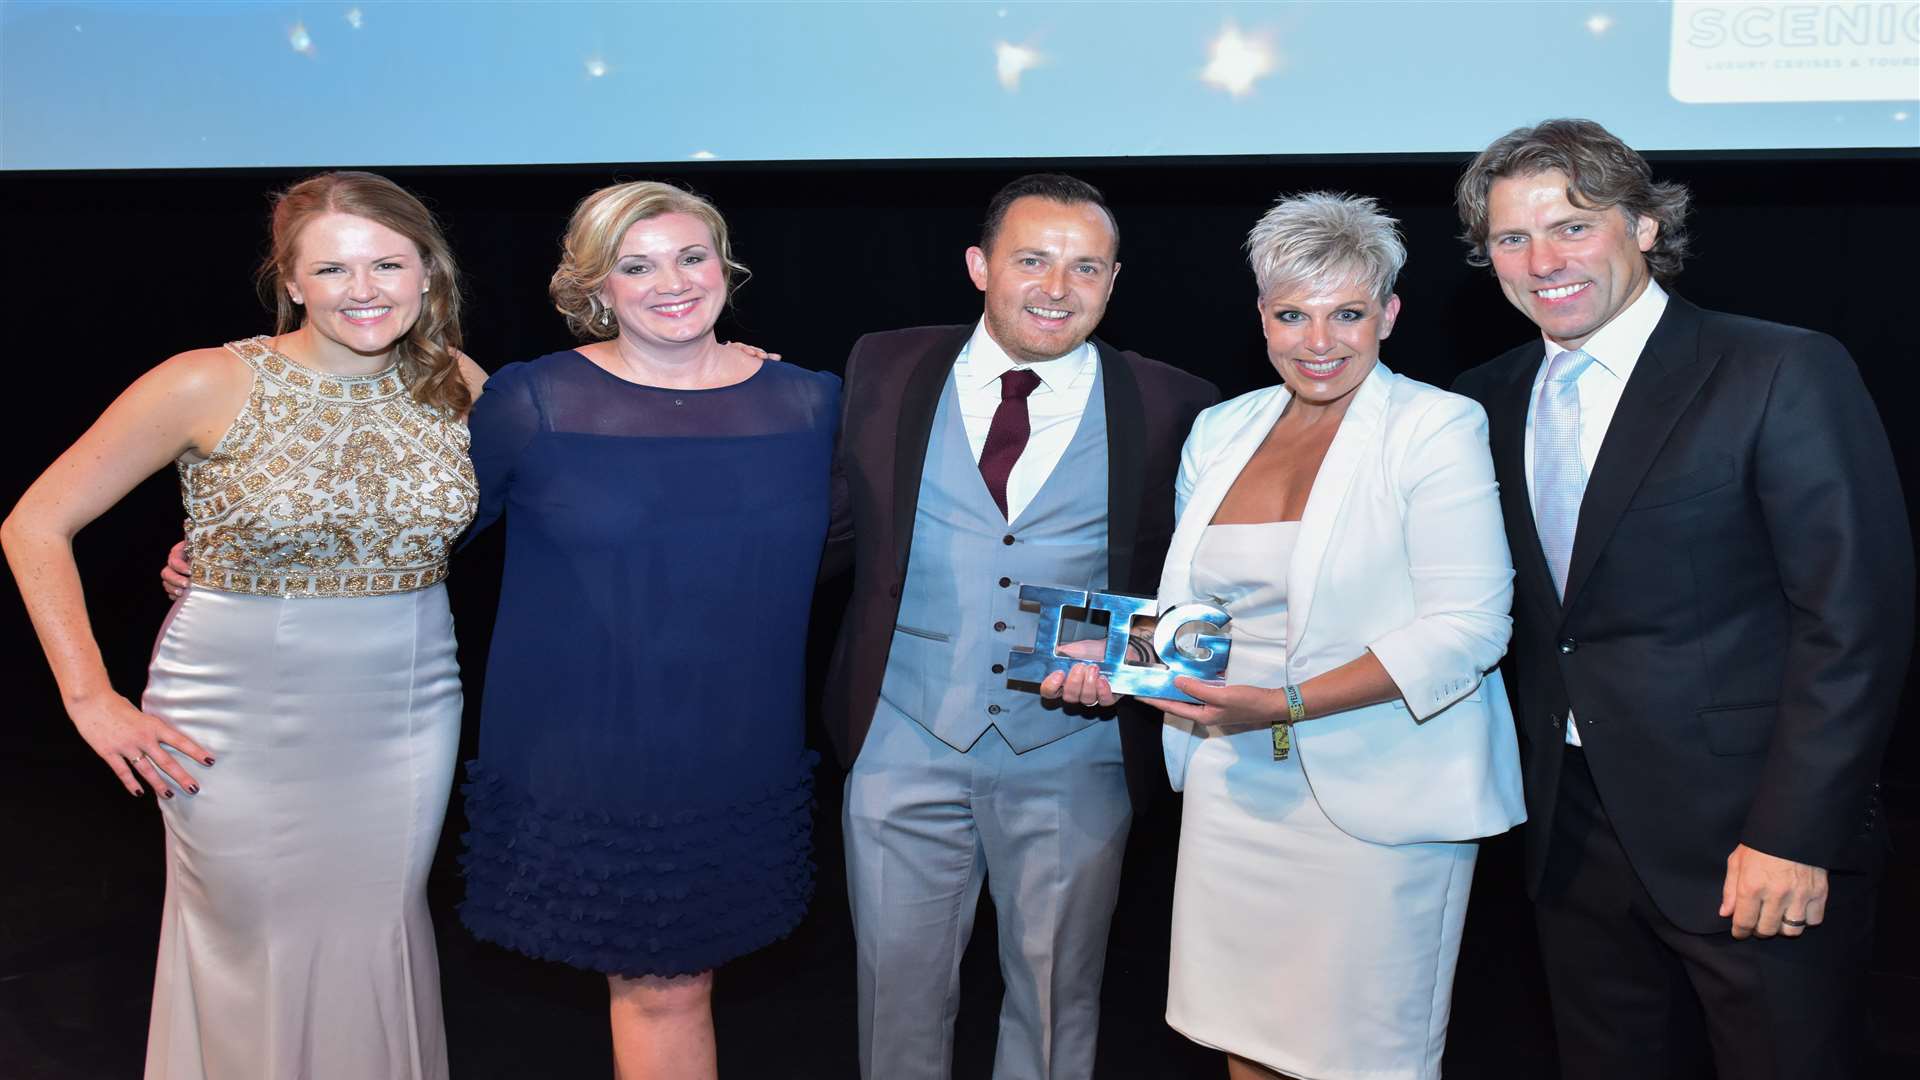 Pippa Jacks of Travel Trade Gazette, Angela Sloan of Scenic & Emerald Waterways, Ashley Close from Holiday Extras, Lindsay Garvey-Jones from Holiday Extras and John Bishop